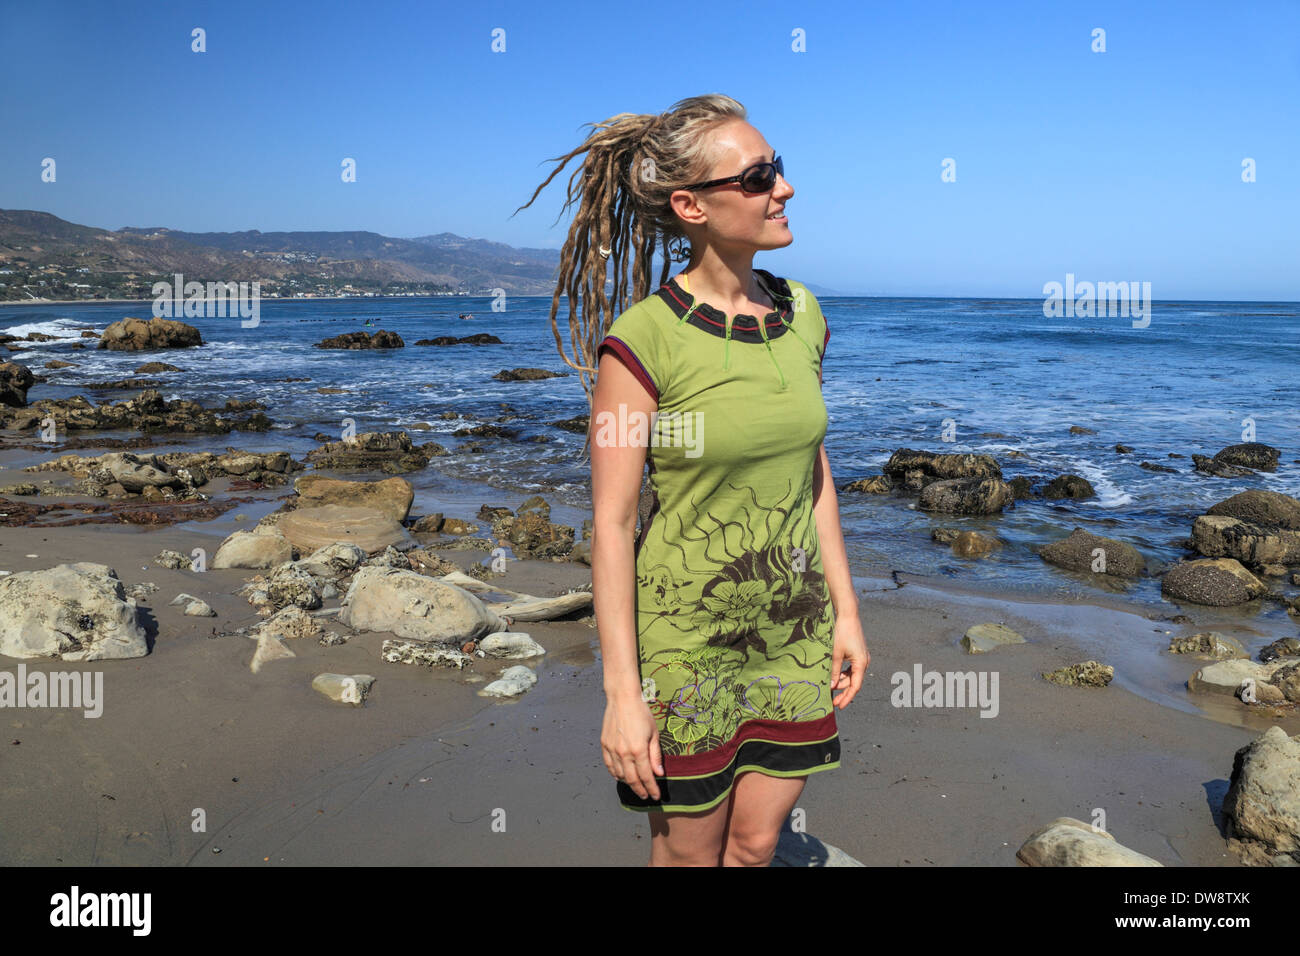 Visitor at beach at  Pt. Dume in Malibu Stock Photo